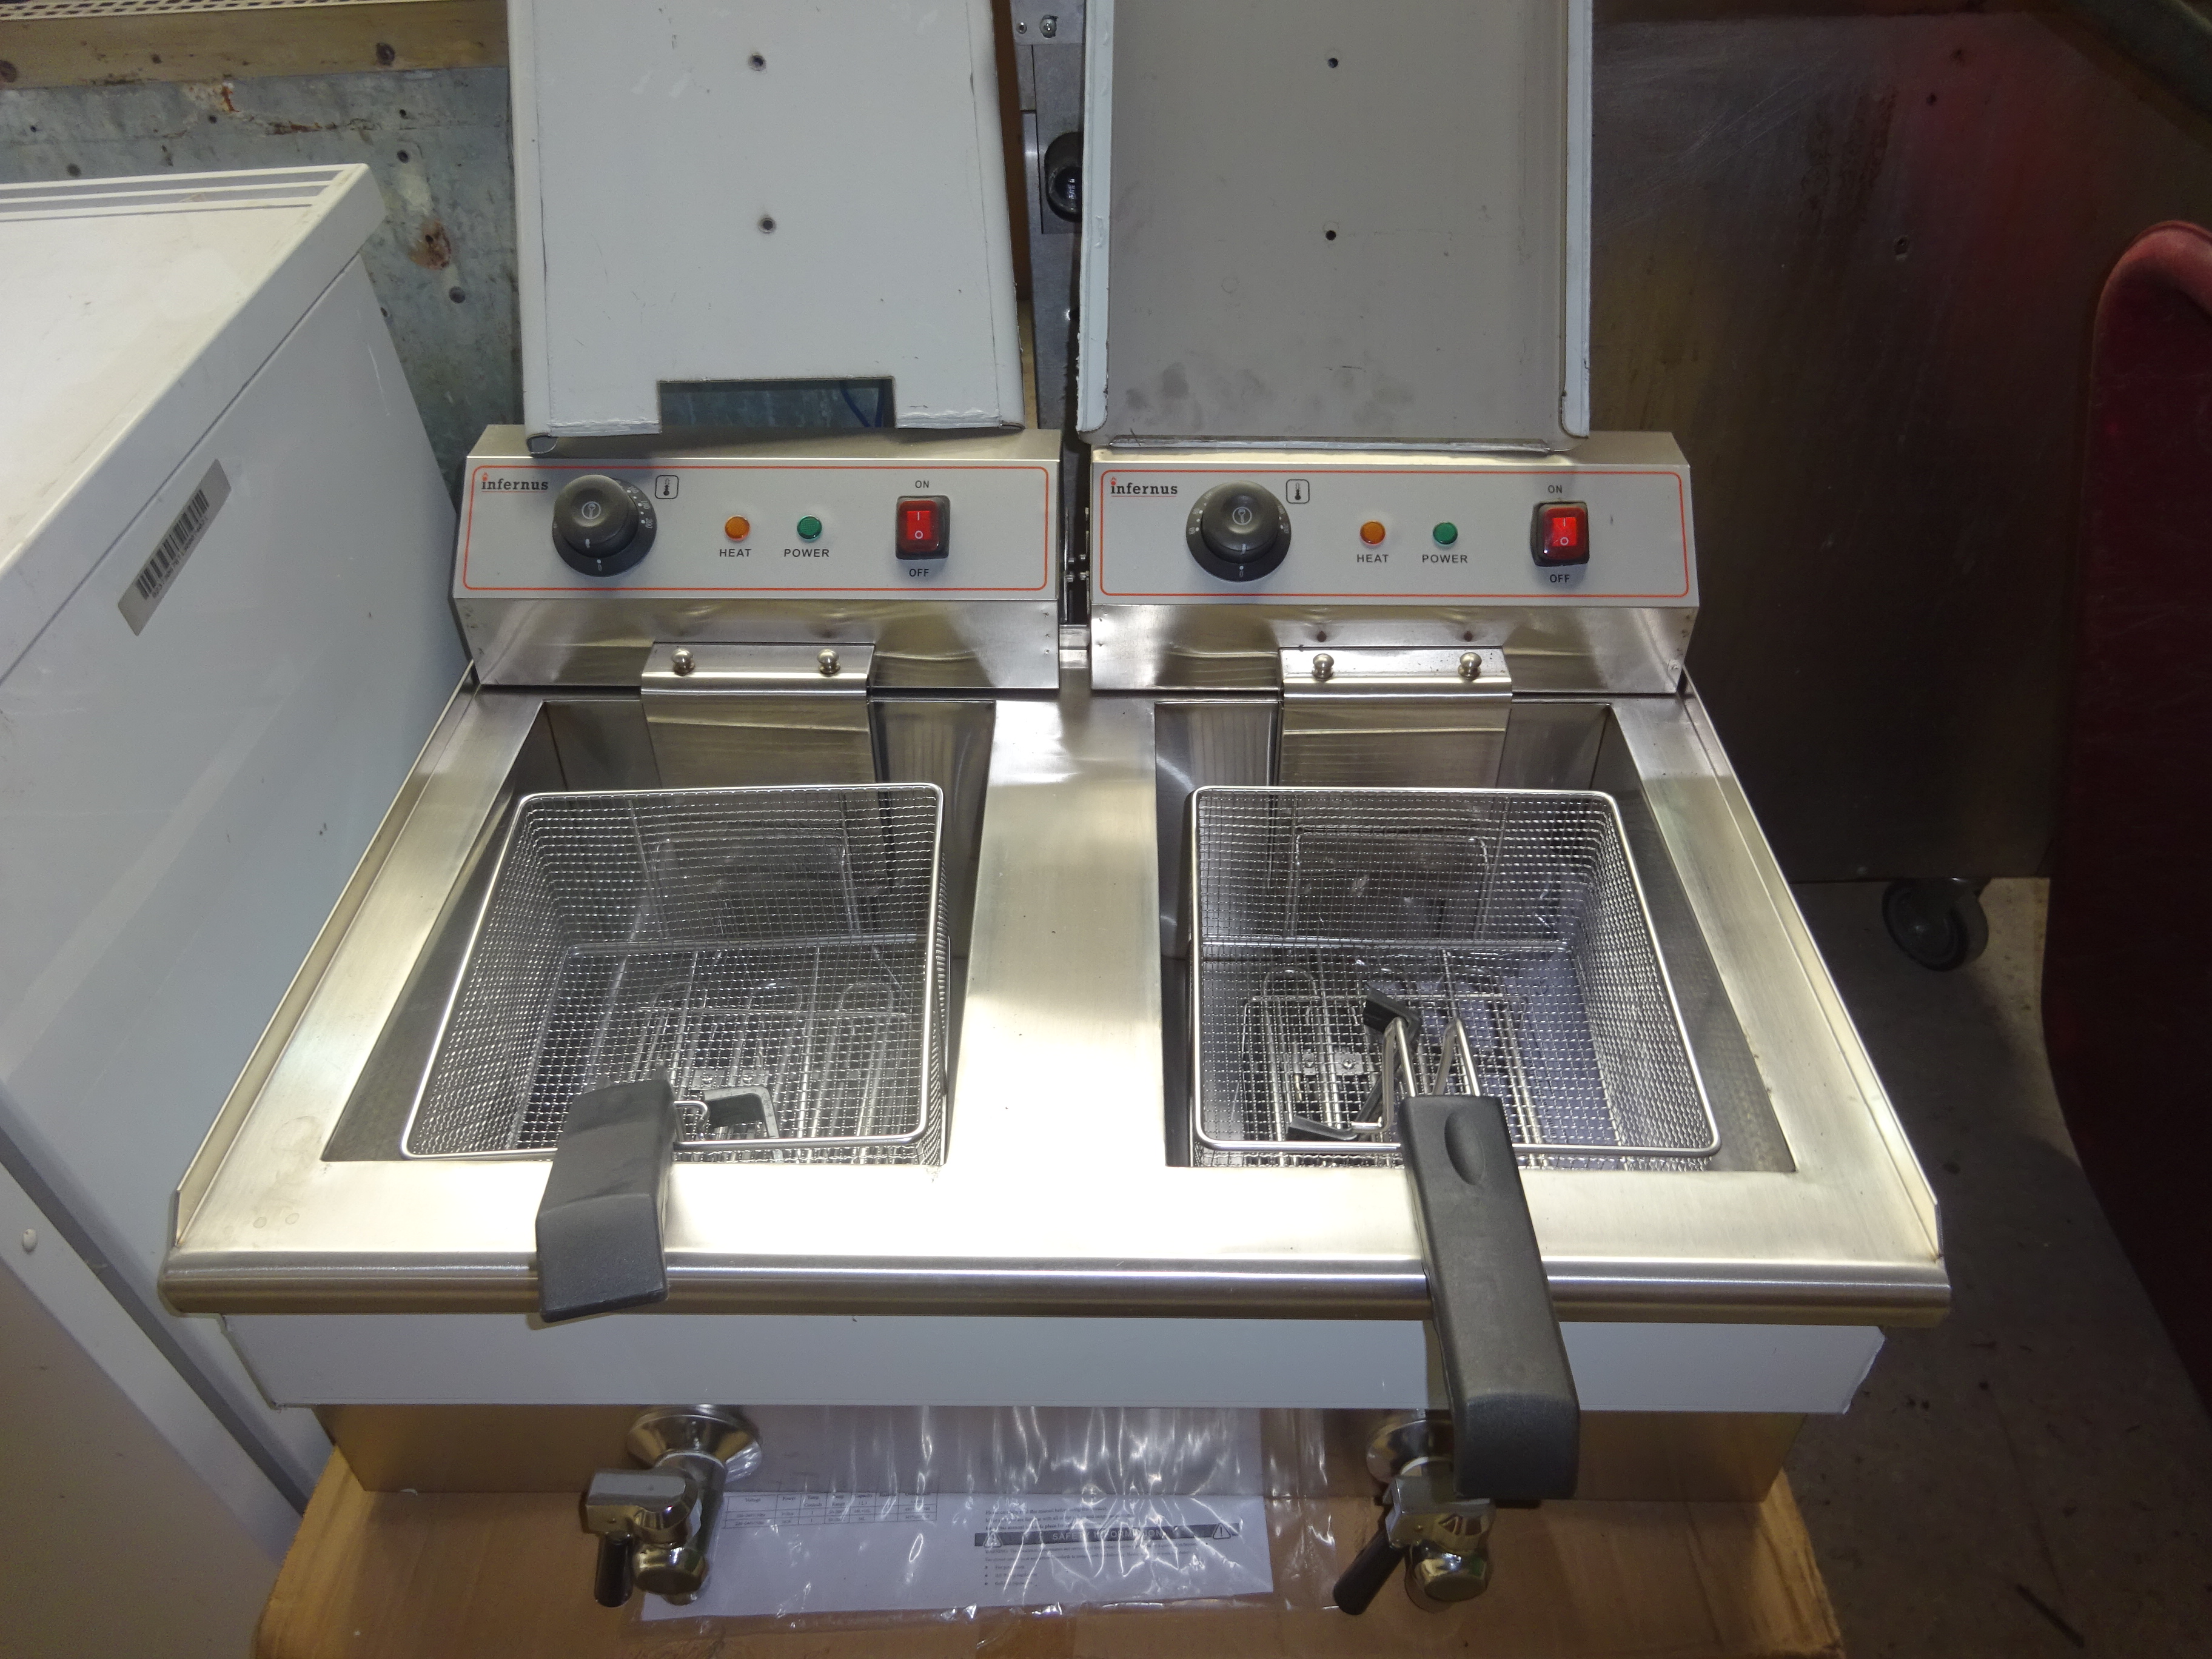 Infernus twin tank electric fryer drain valves to front